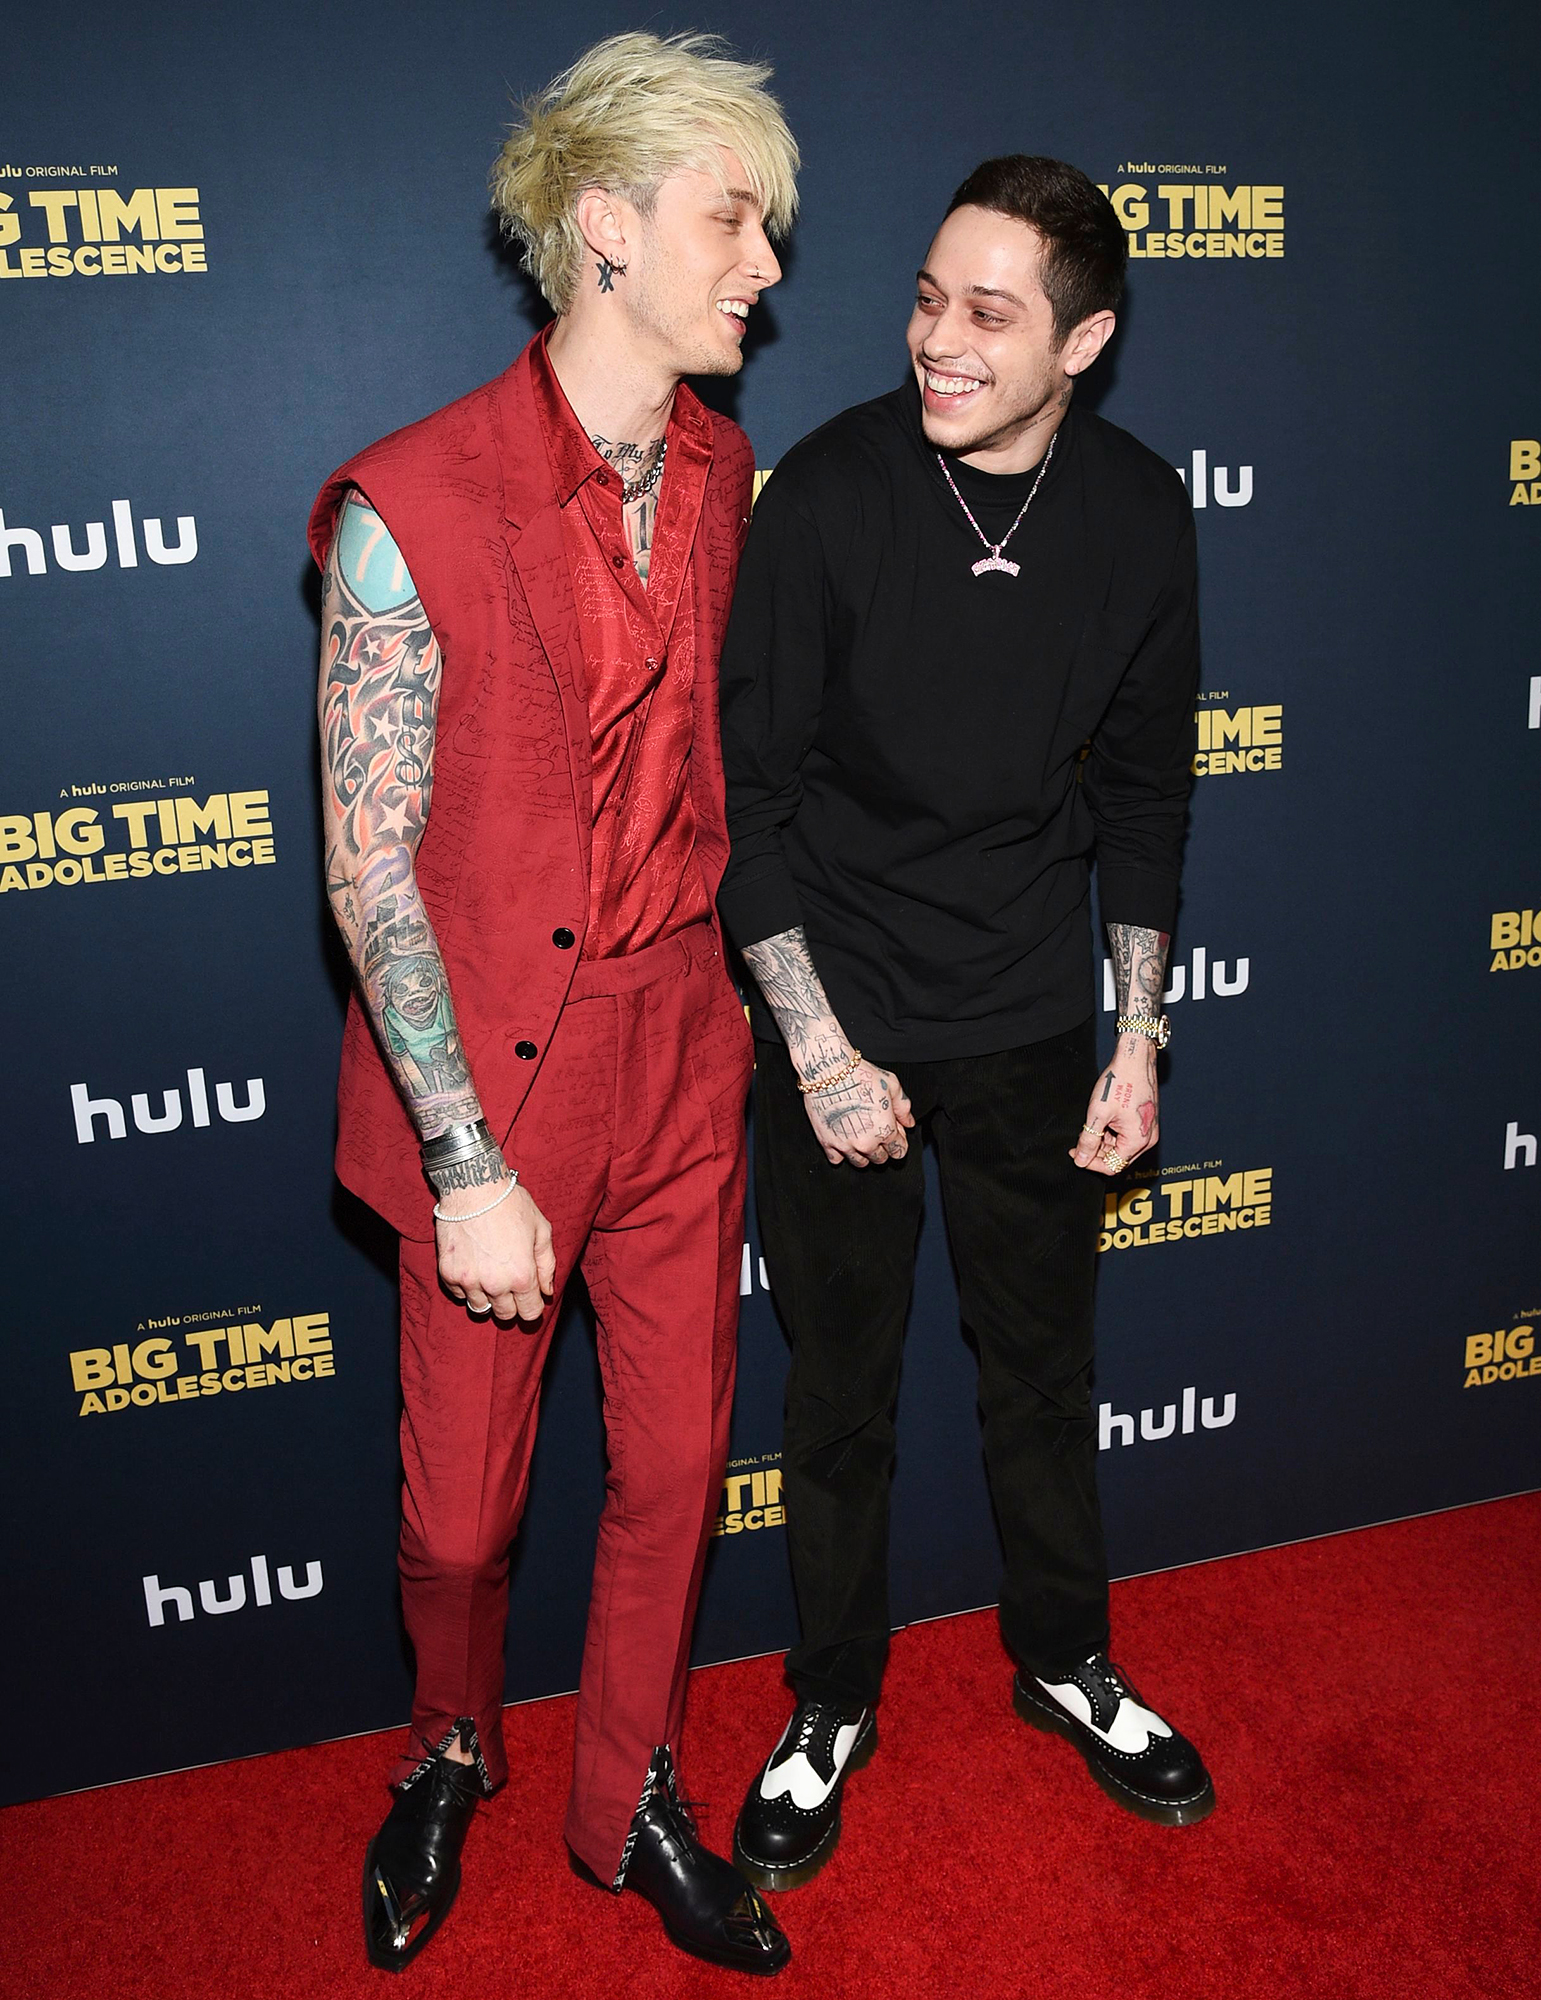 Pete-Davidson-Is-All-Smiles-During-Rare-Red-Carpet-Appearance